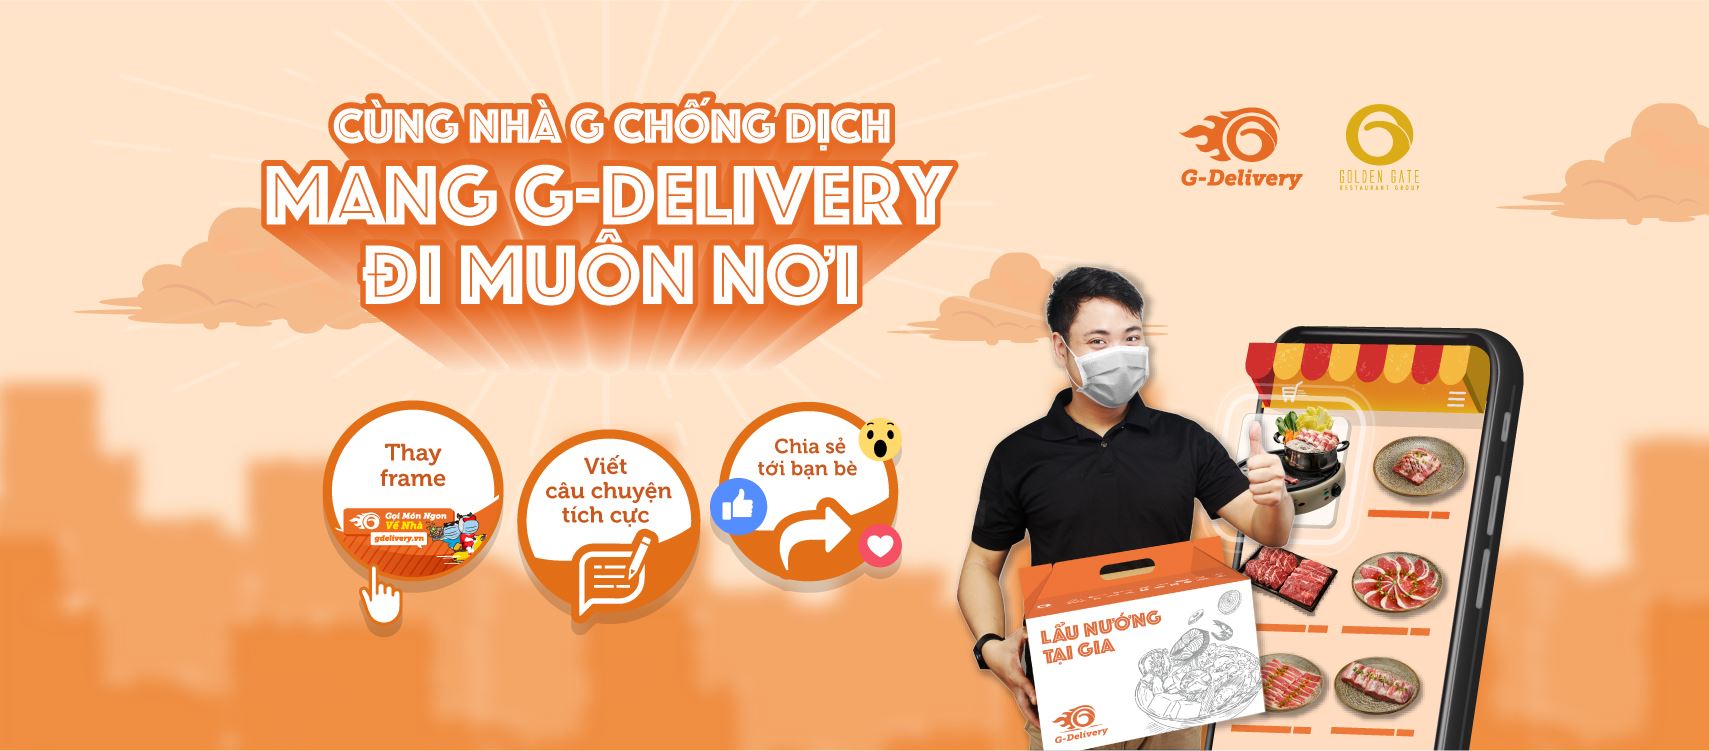 Ứng dụng G-Delivery của Golden Gate